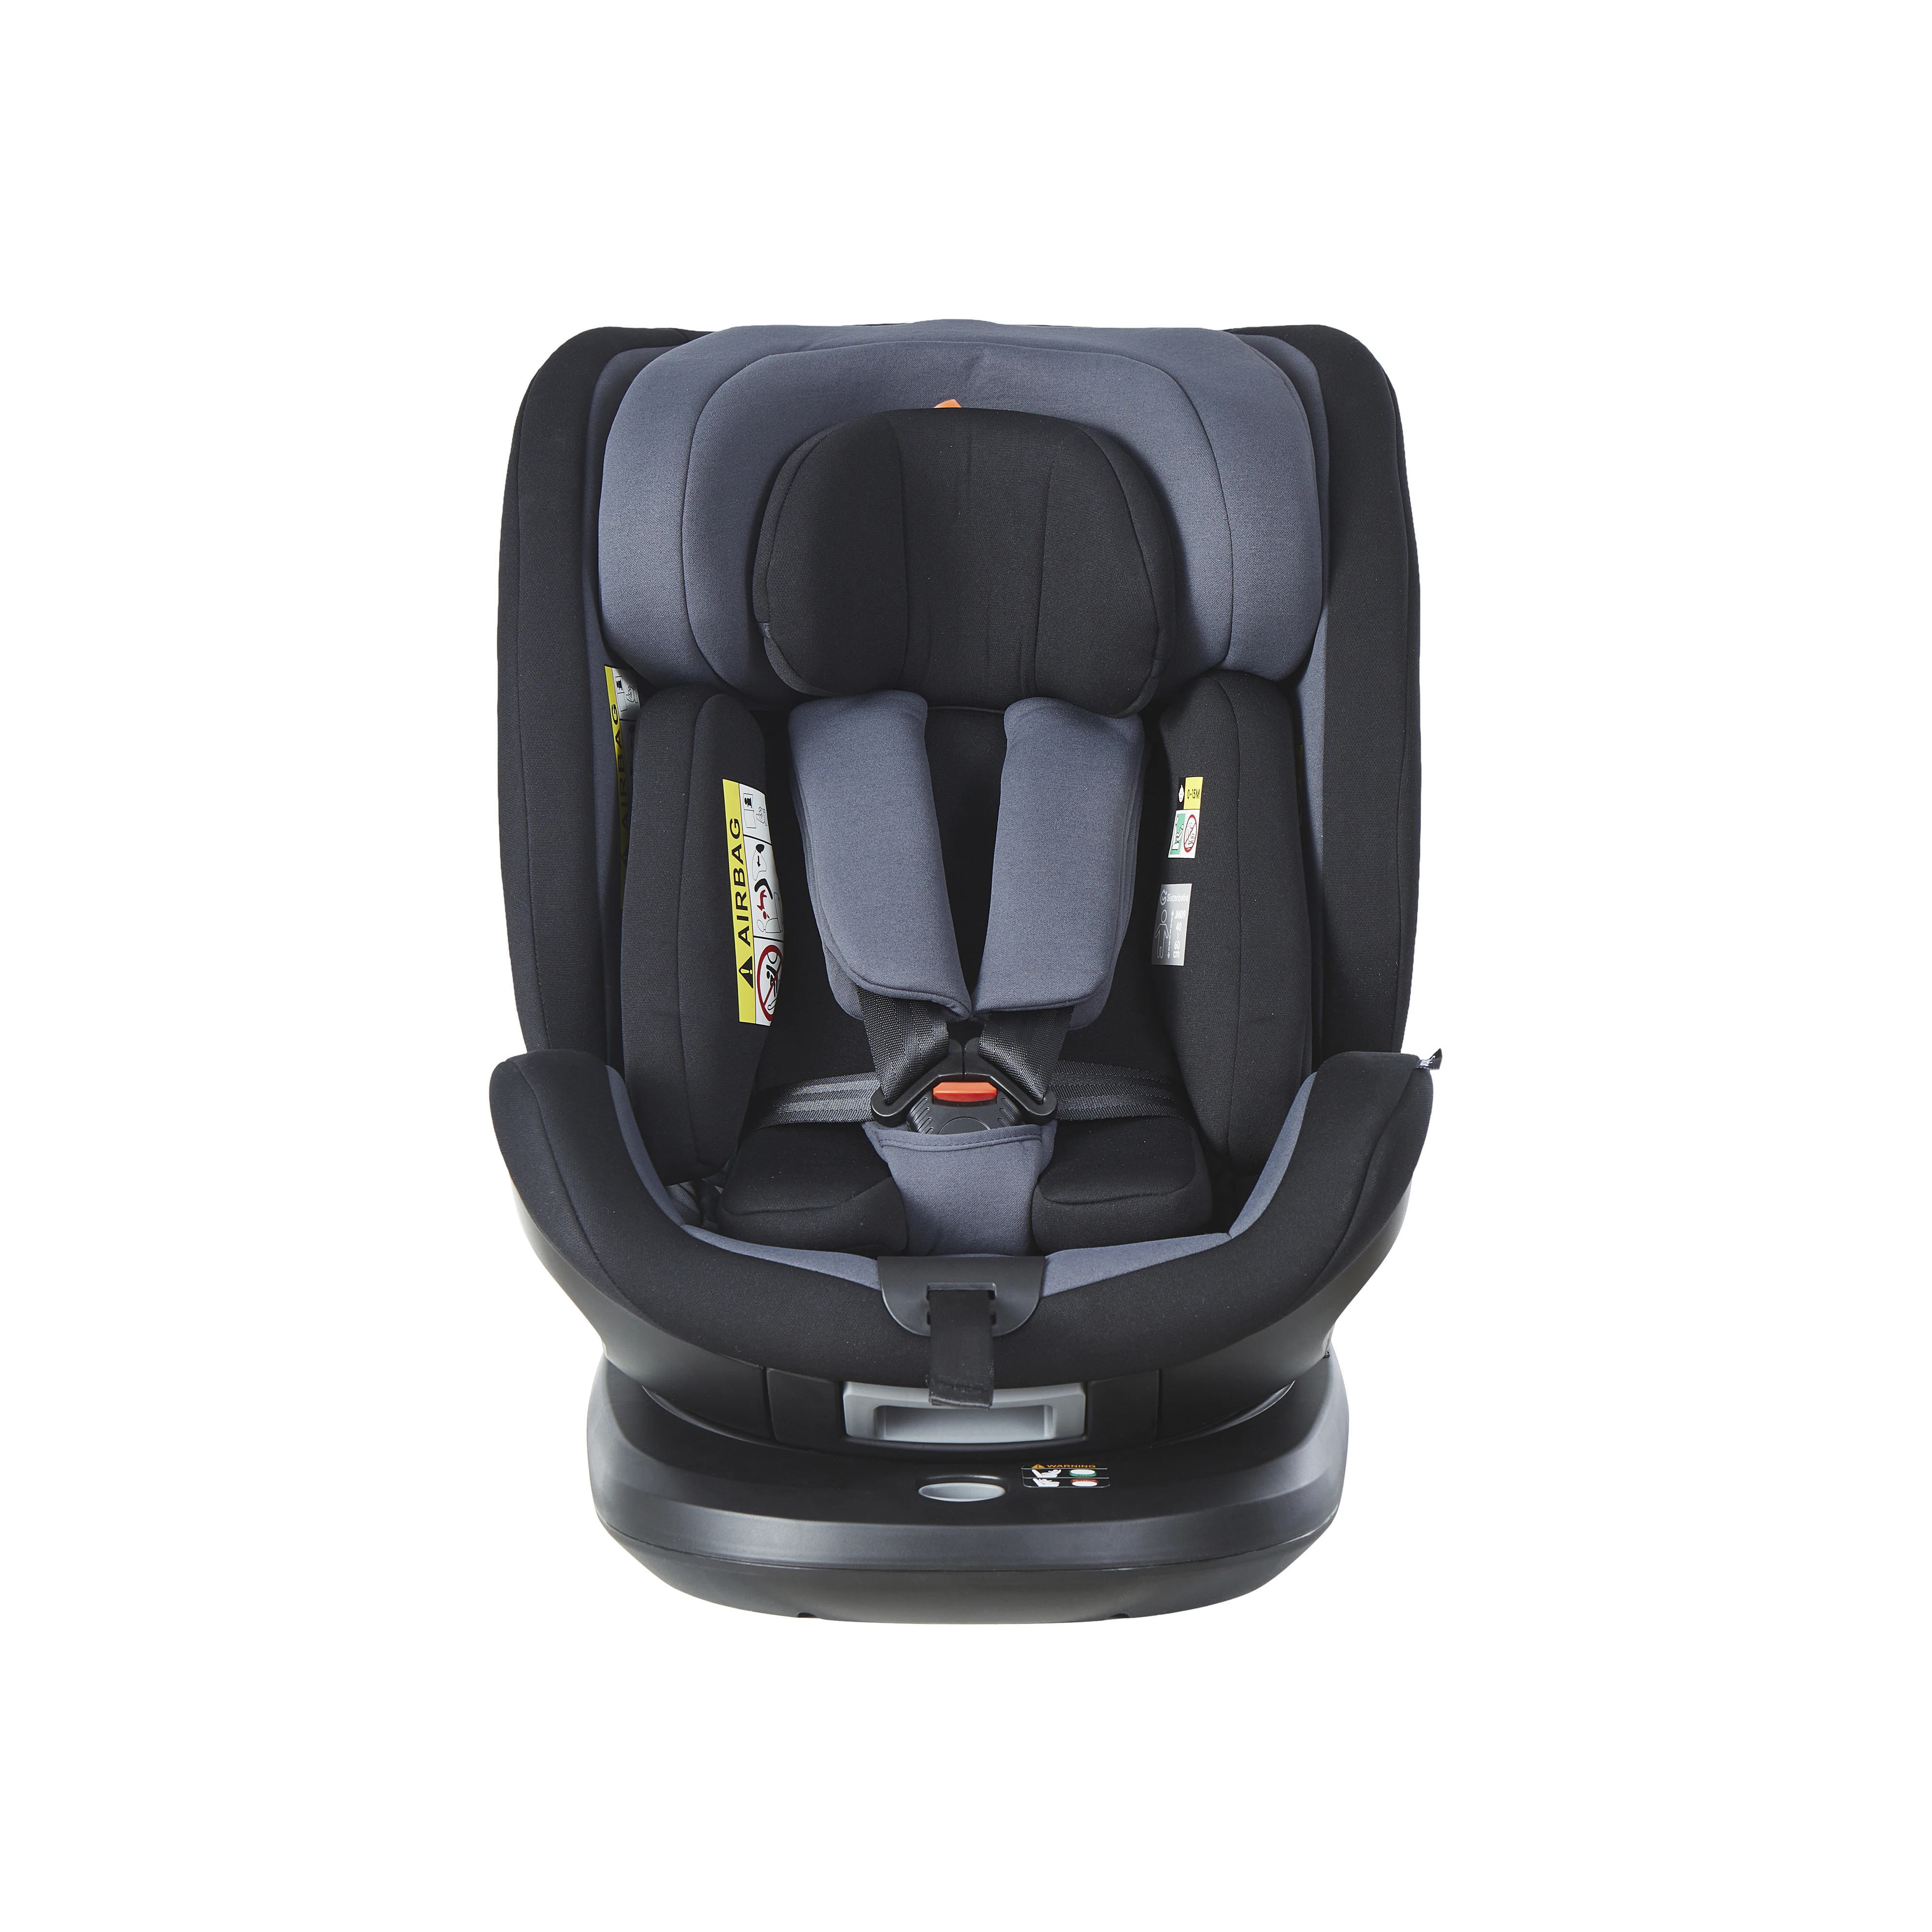 Sisterbebe JM09 ECE R129 40-150Cm ISOFIX 360 Rotating Baby car seats 0-36Kg Safety for All months and ages